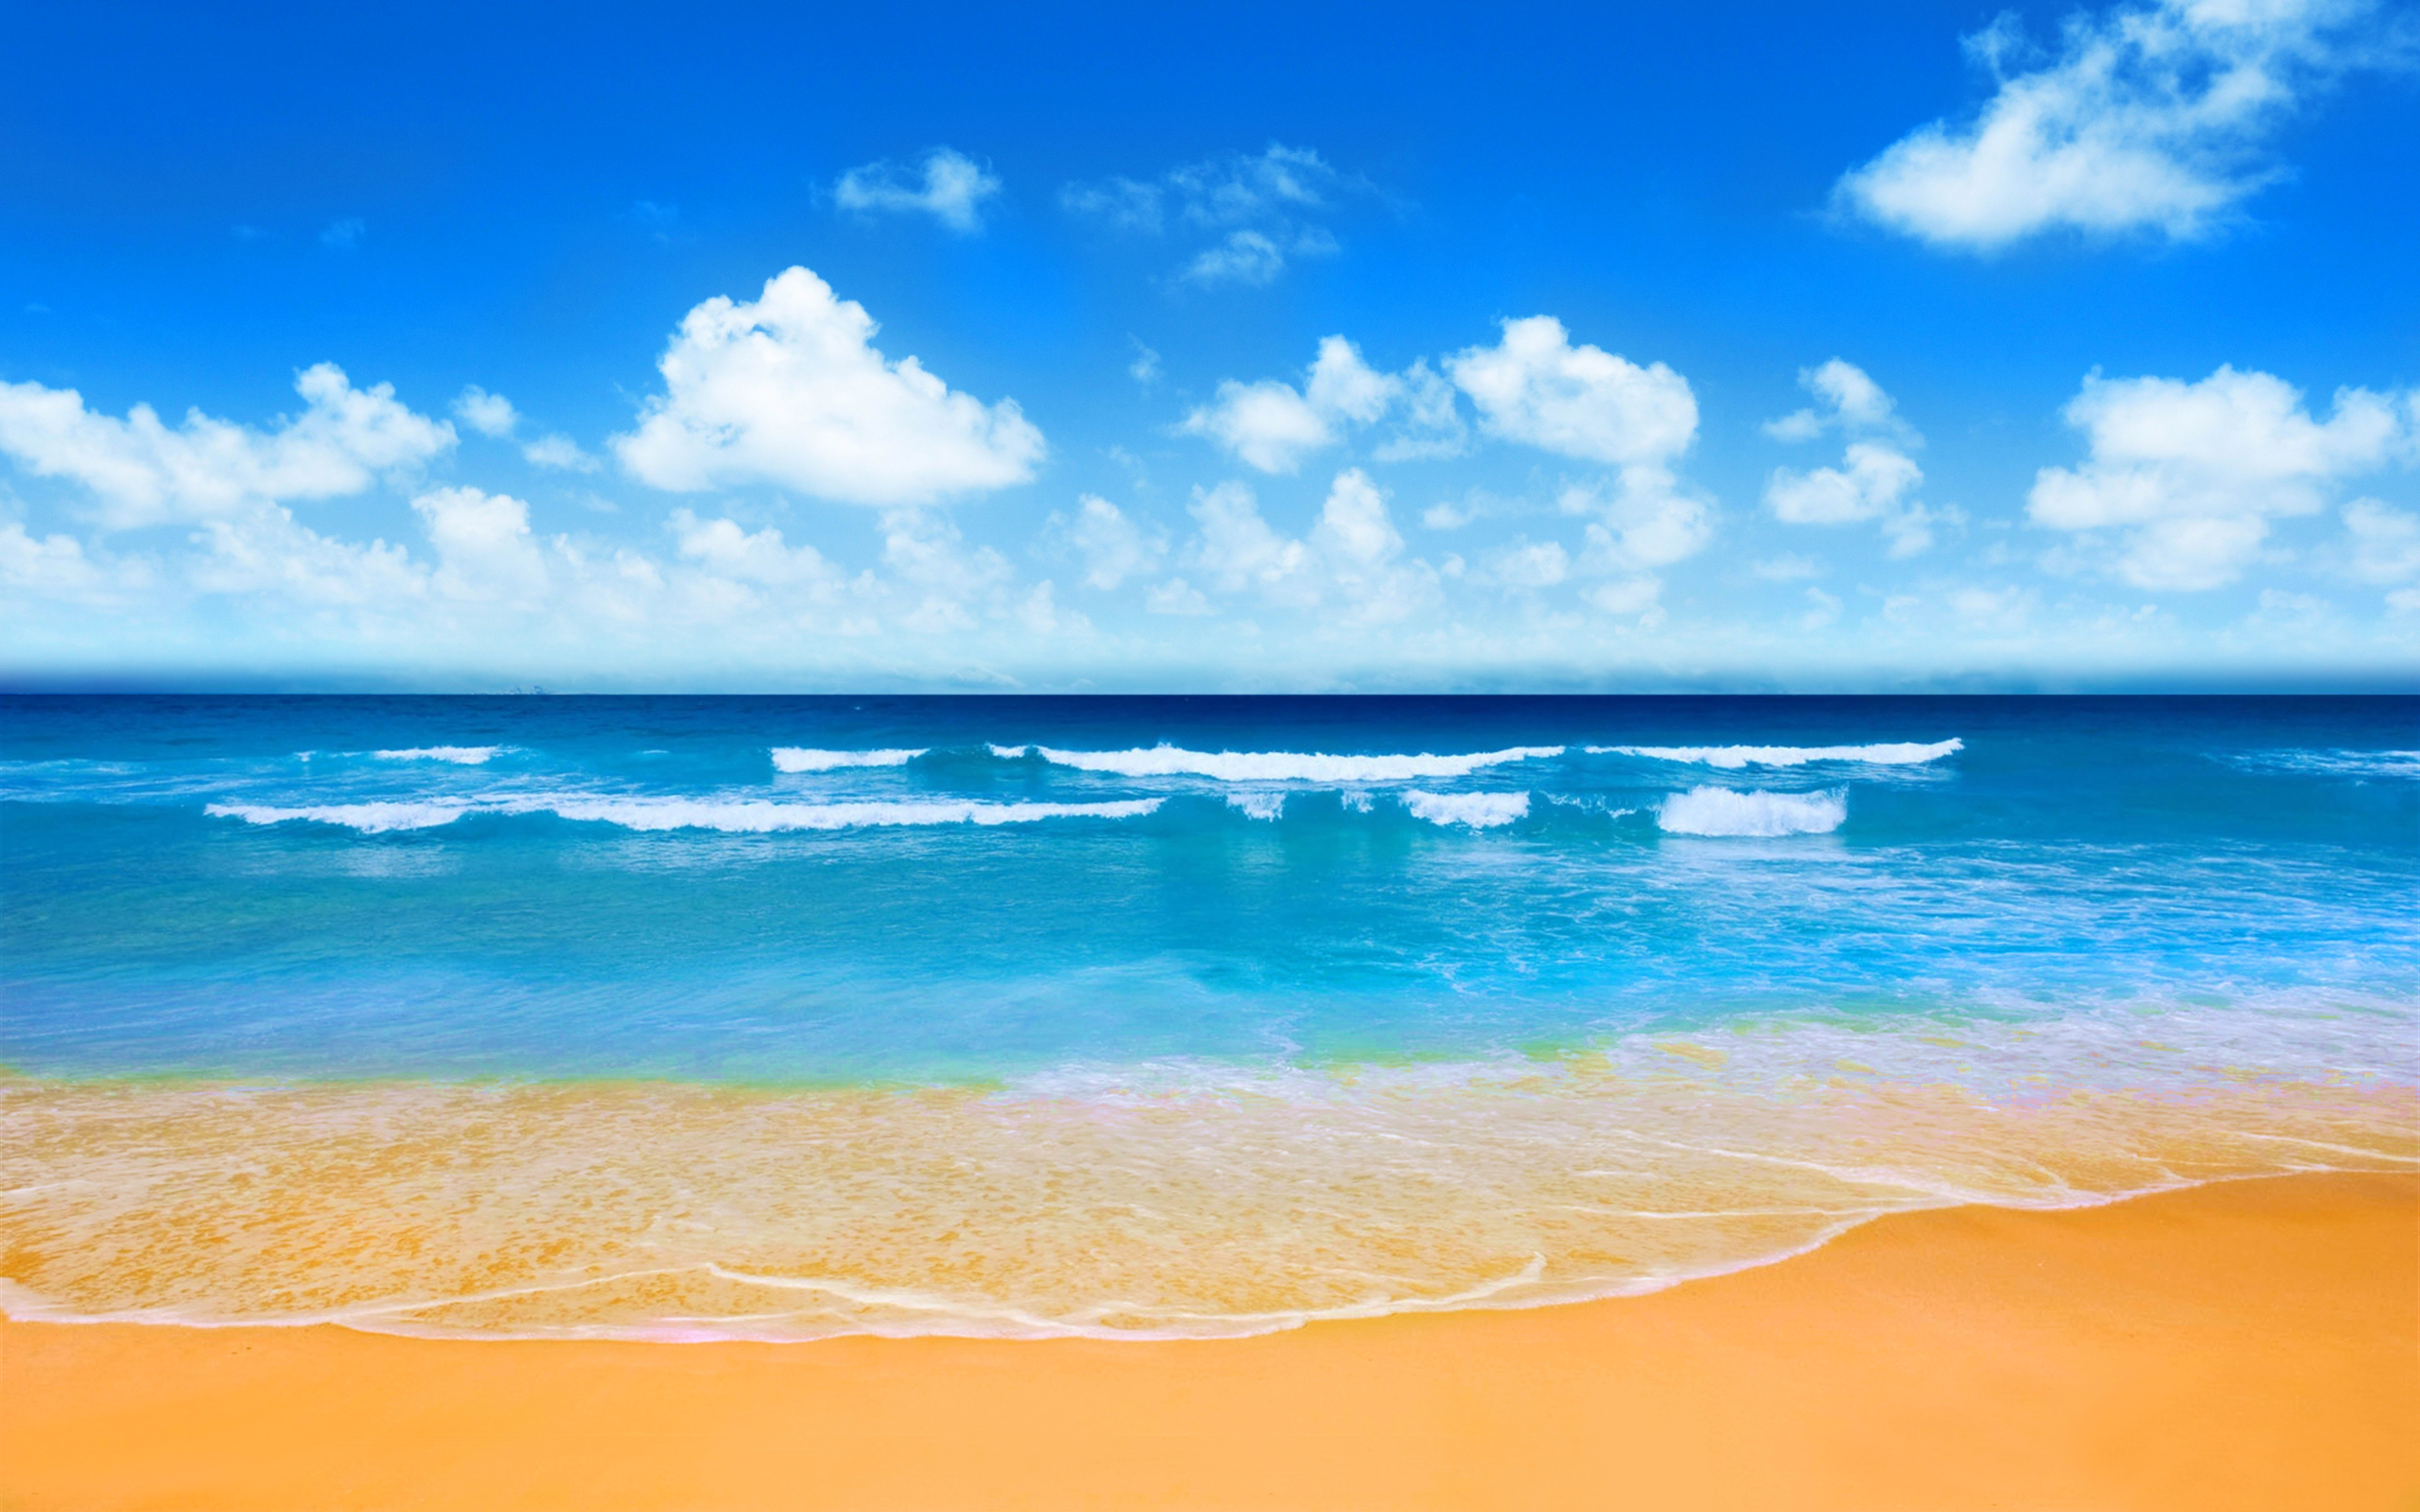 Beach Image Free Download